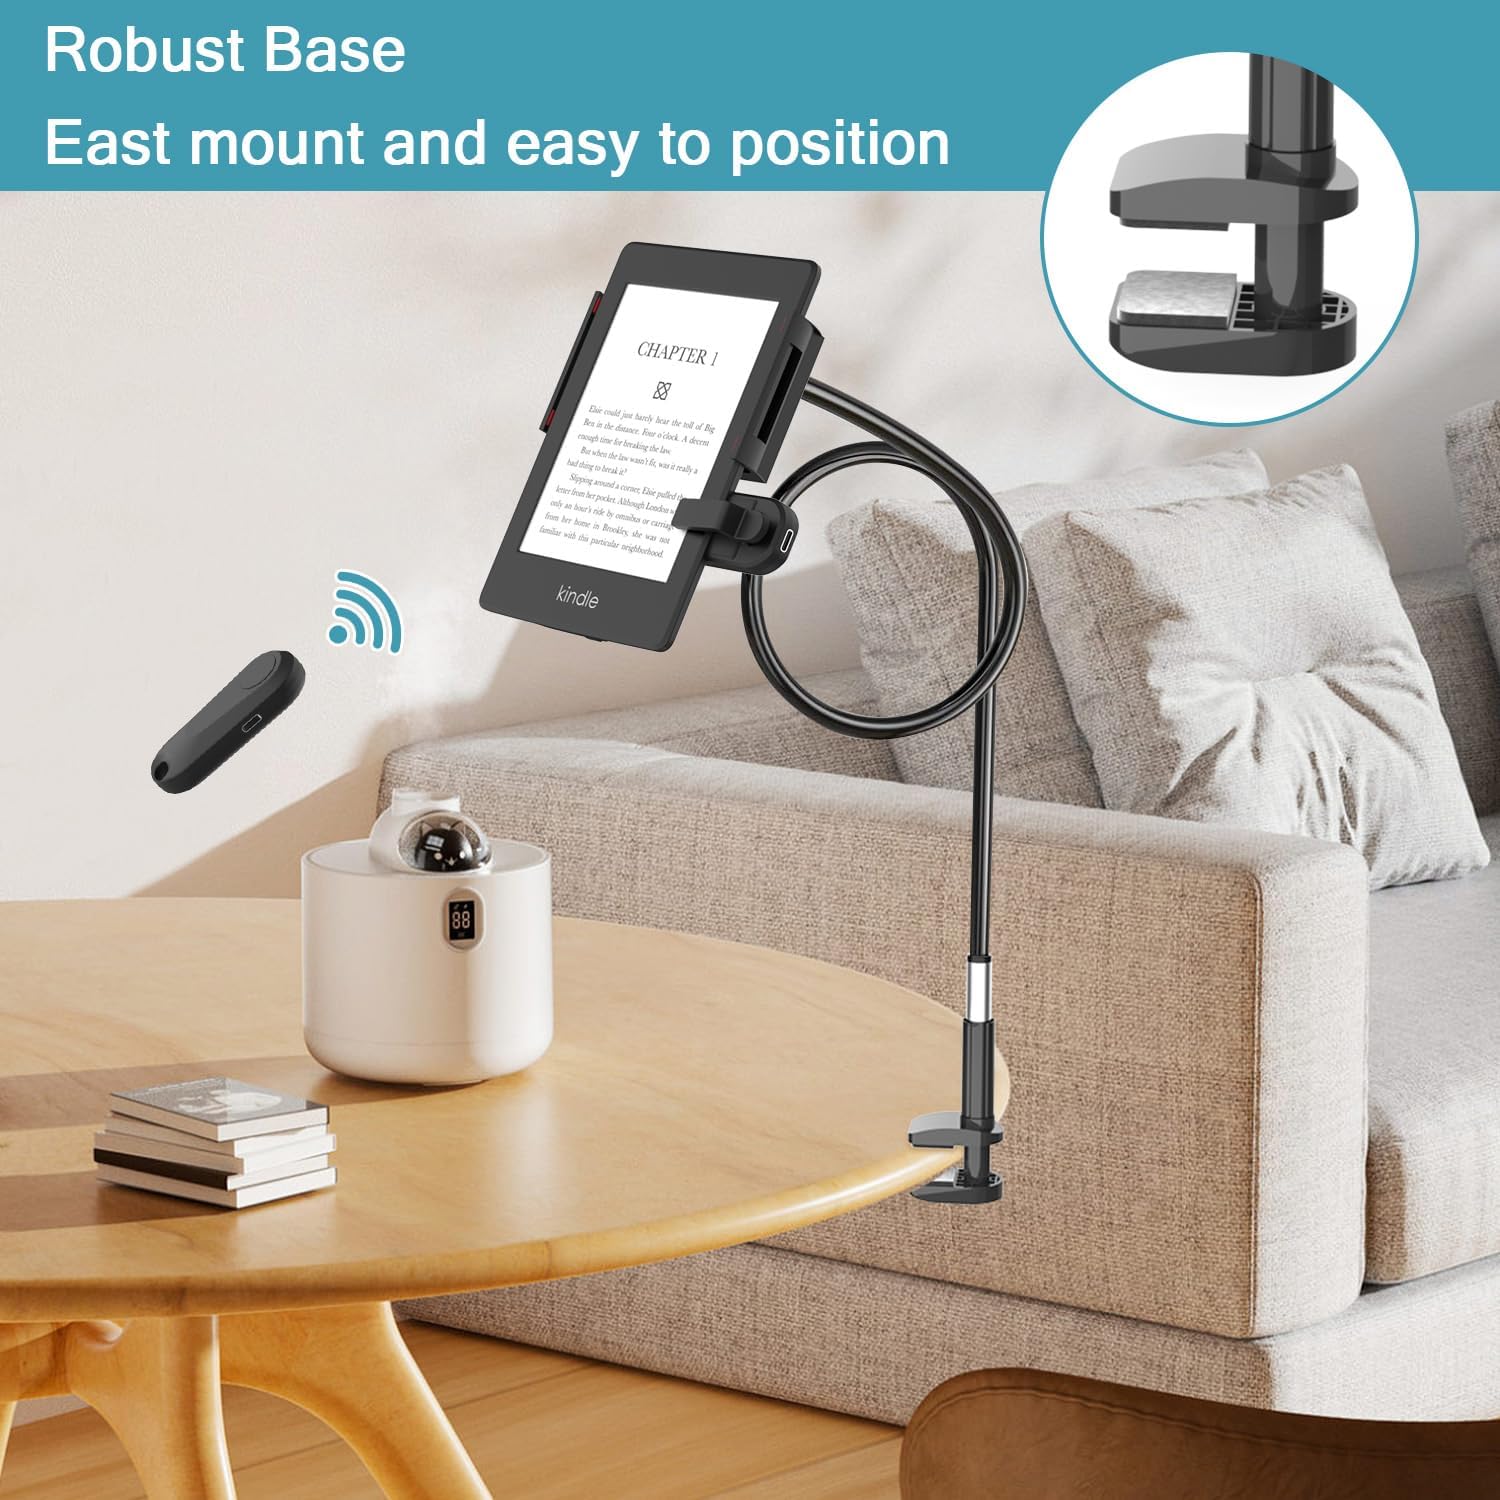 Gooseneck Tablet Holder for Kindle Reading in Bed with Remote Page Turner, Hands Free Lazy Arm Stand for Kindle Accessories, Gifts for Readers